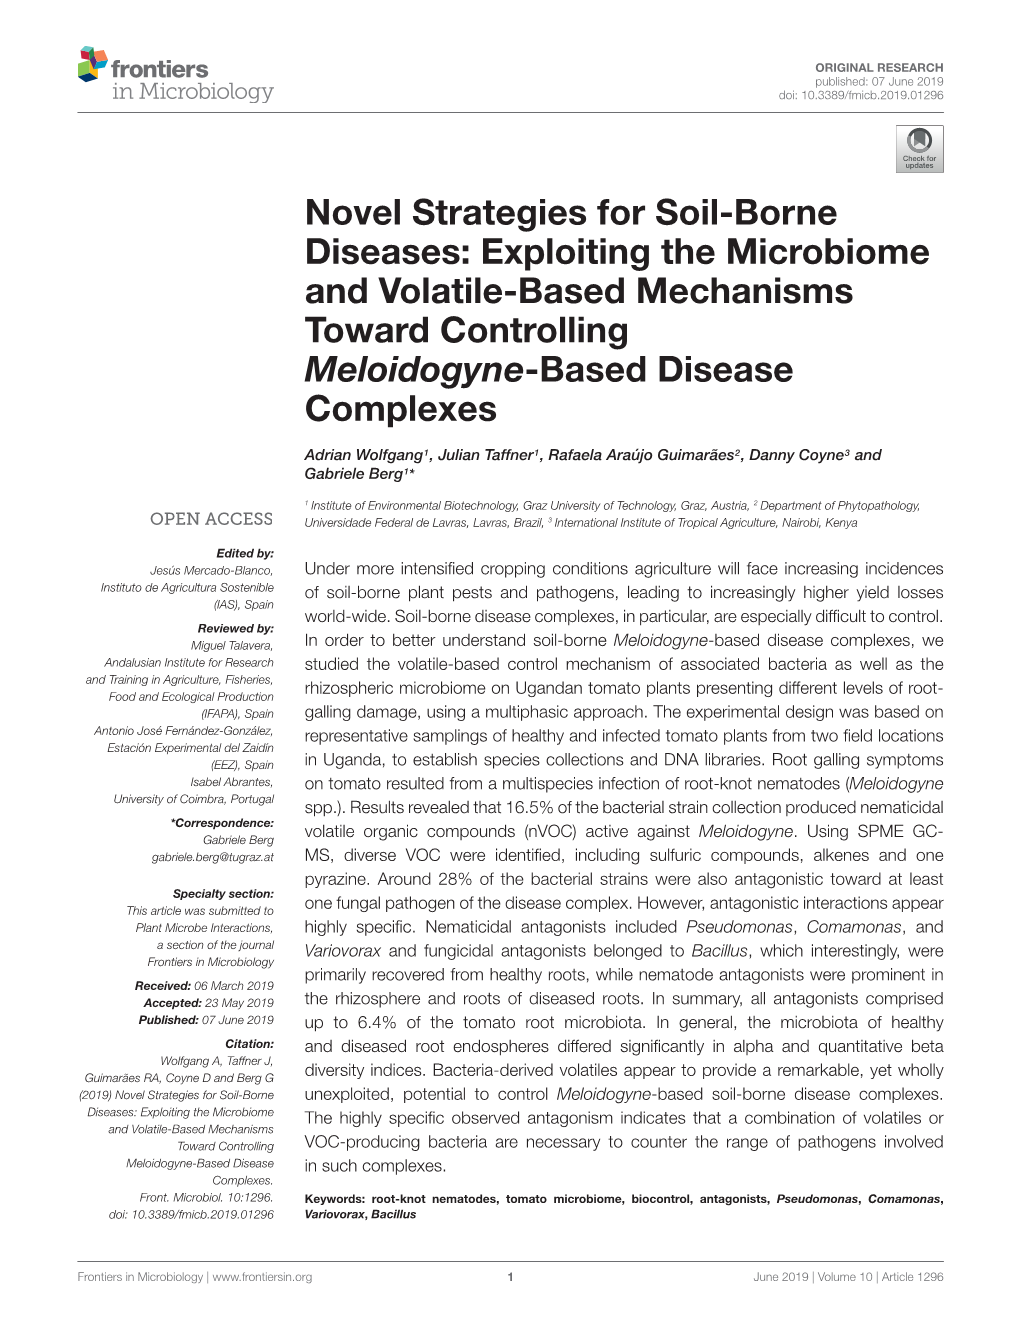 Novel Strategies for Soil-Borne Diseases: Exploiting the Microbiome and Volatile-Based Mechanisms Toward Controlling Meloidogyne-Based Disease Complexes